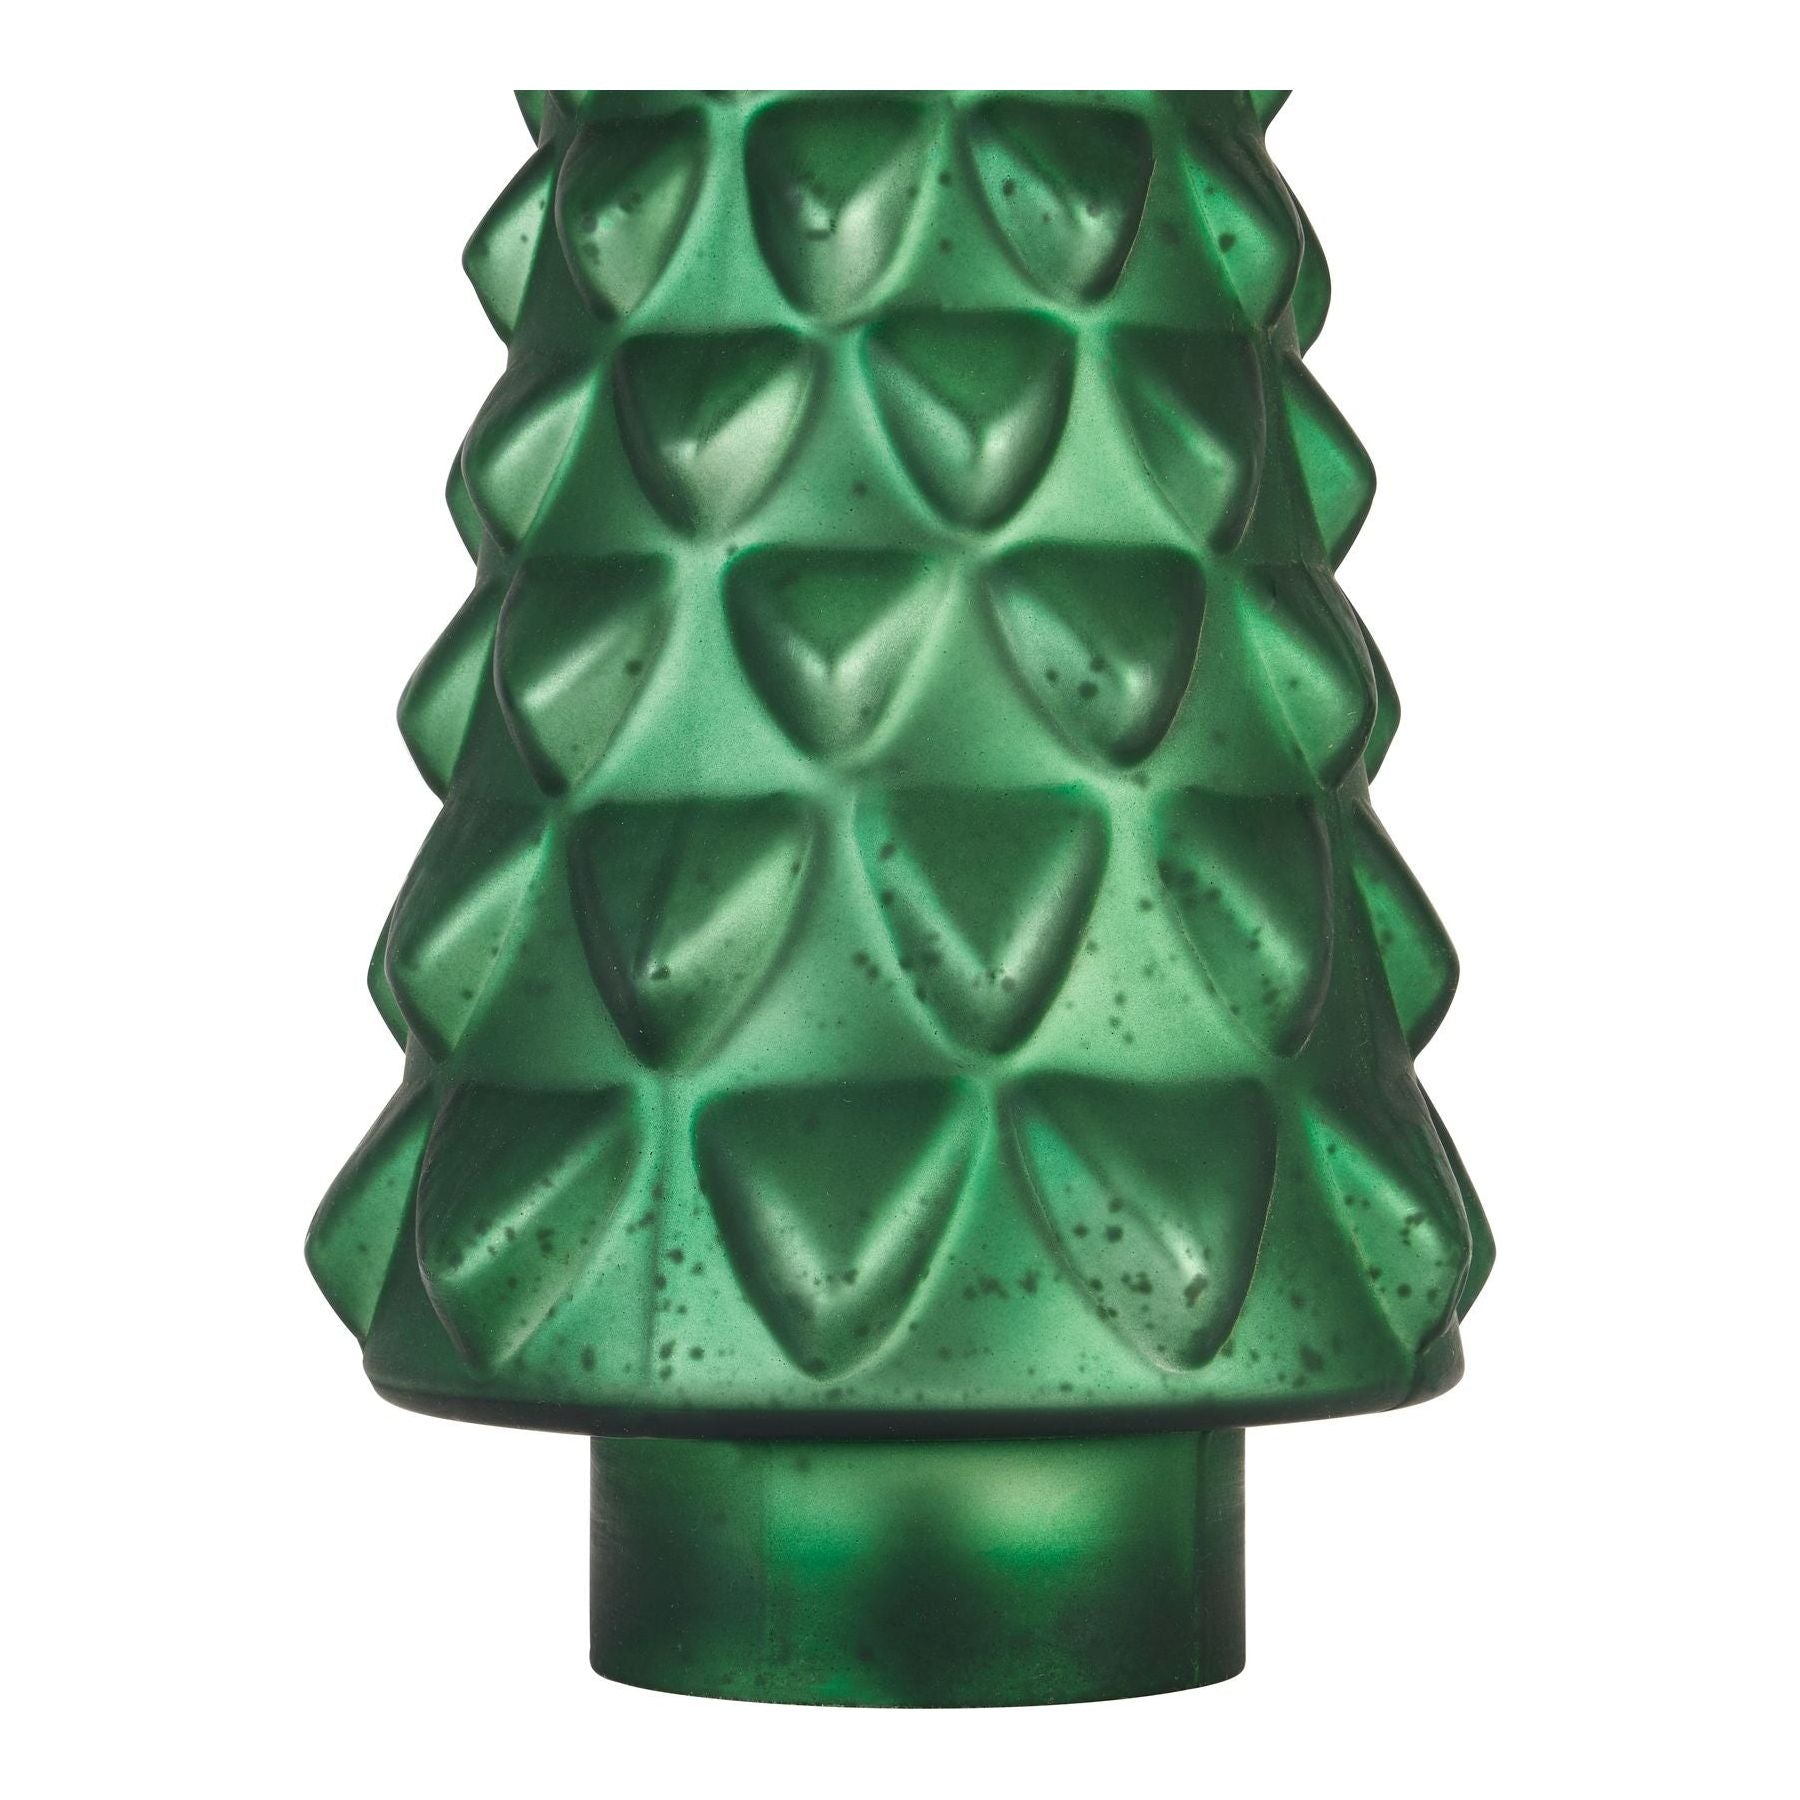 Noel Collection Large Forest Green Glass Decorative Tree - Ashton and Finch